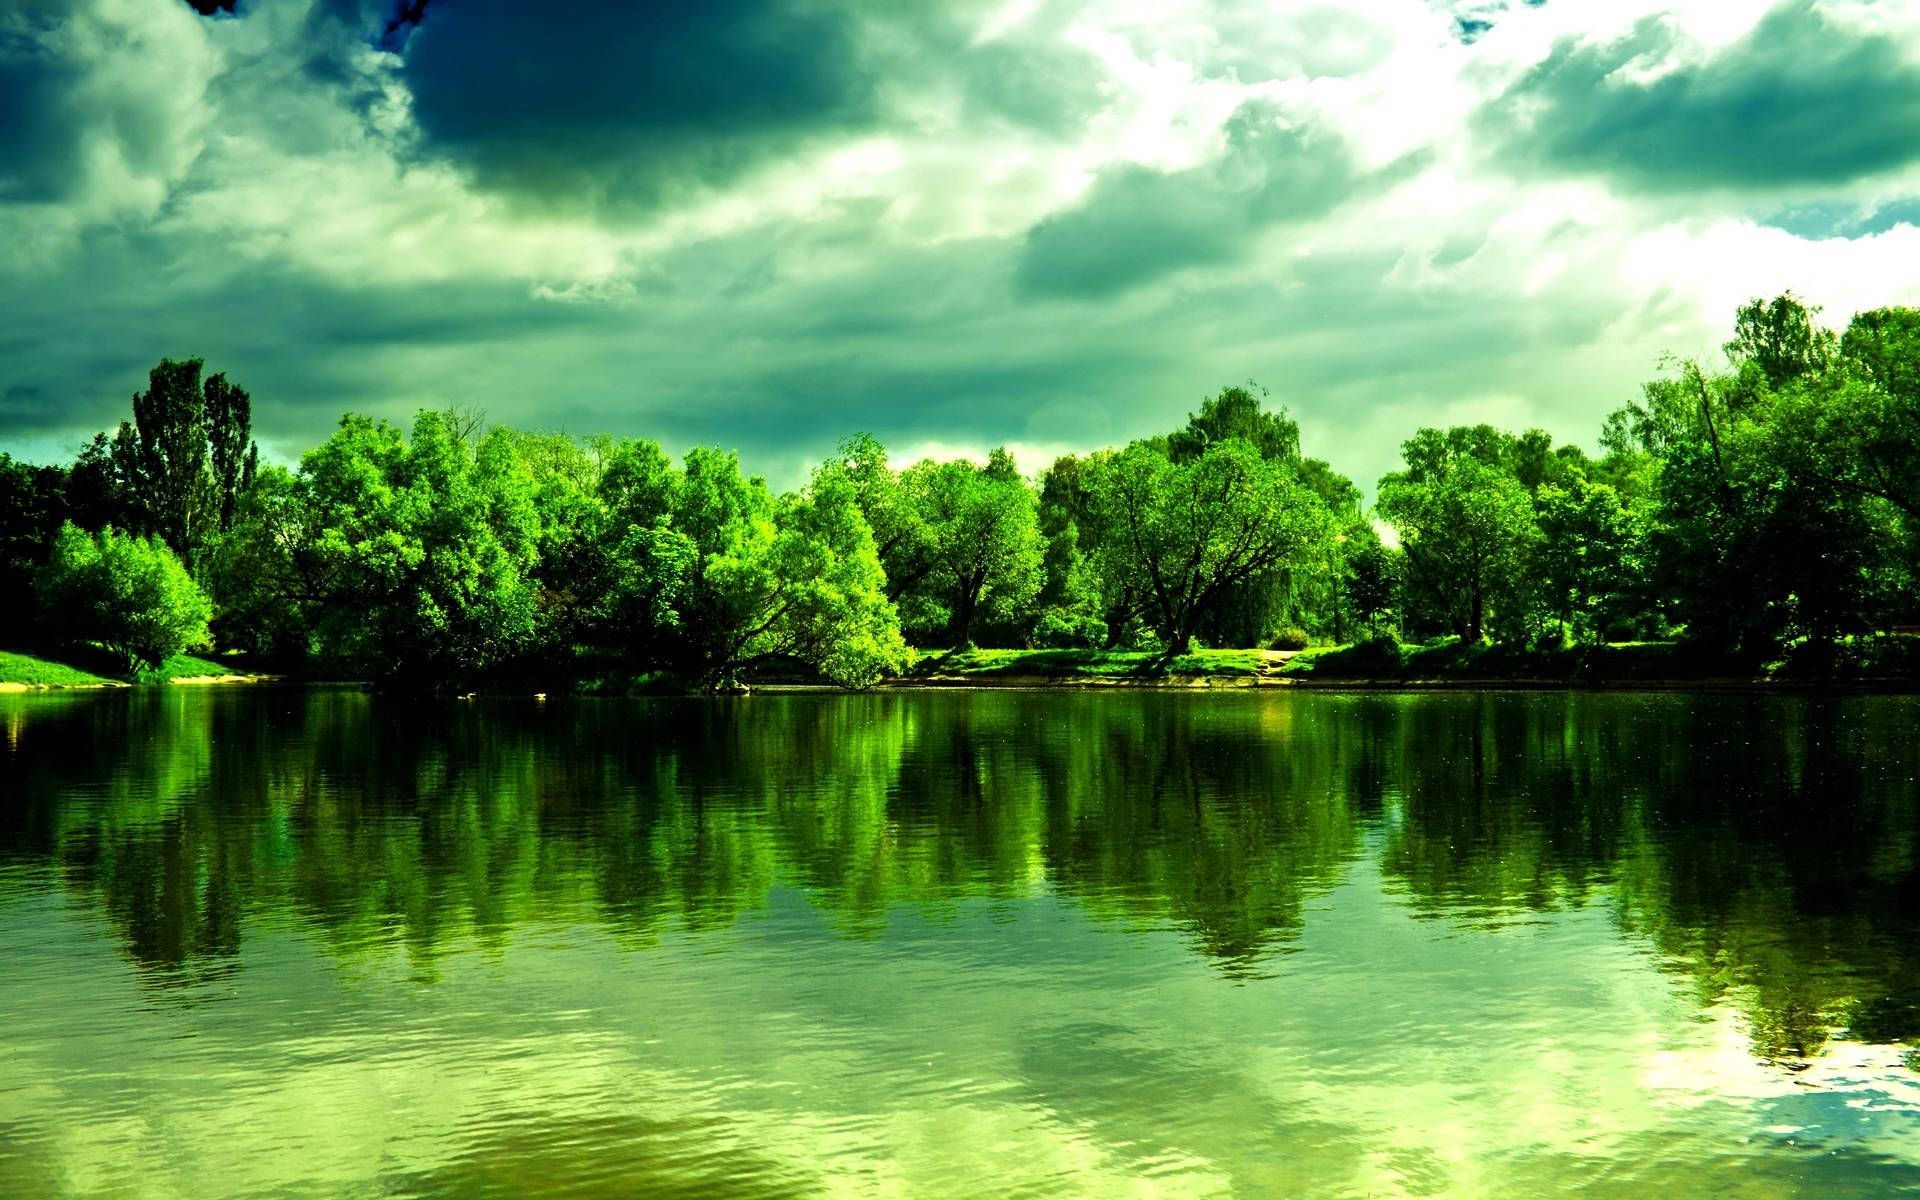 A lake with green trees and clouds in the background - Lake